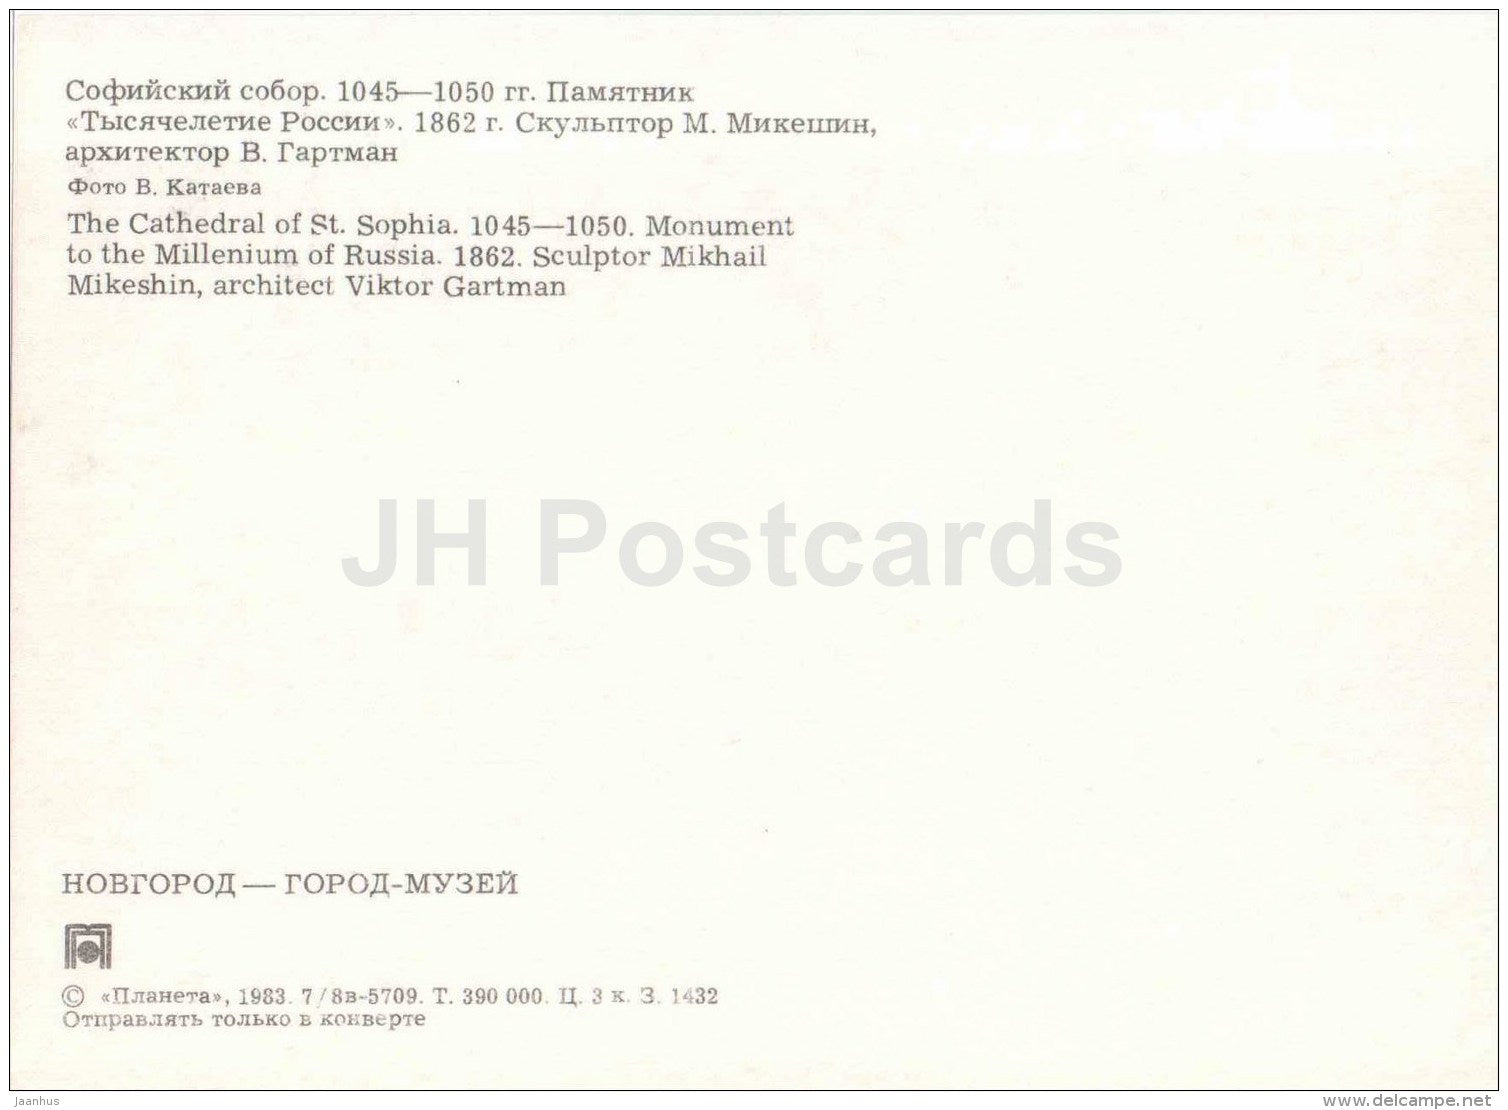 The Cathedral of St. Sophia - monument to the Millennium of Russia - Novgorod - 1983 - Russia USSR - unused - JH Postcards